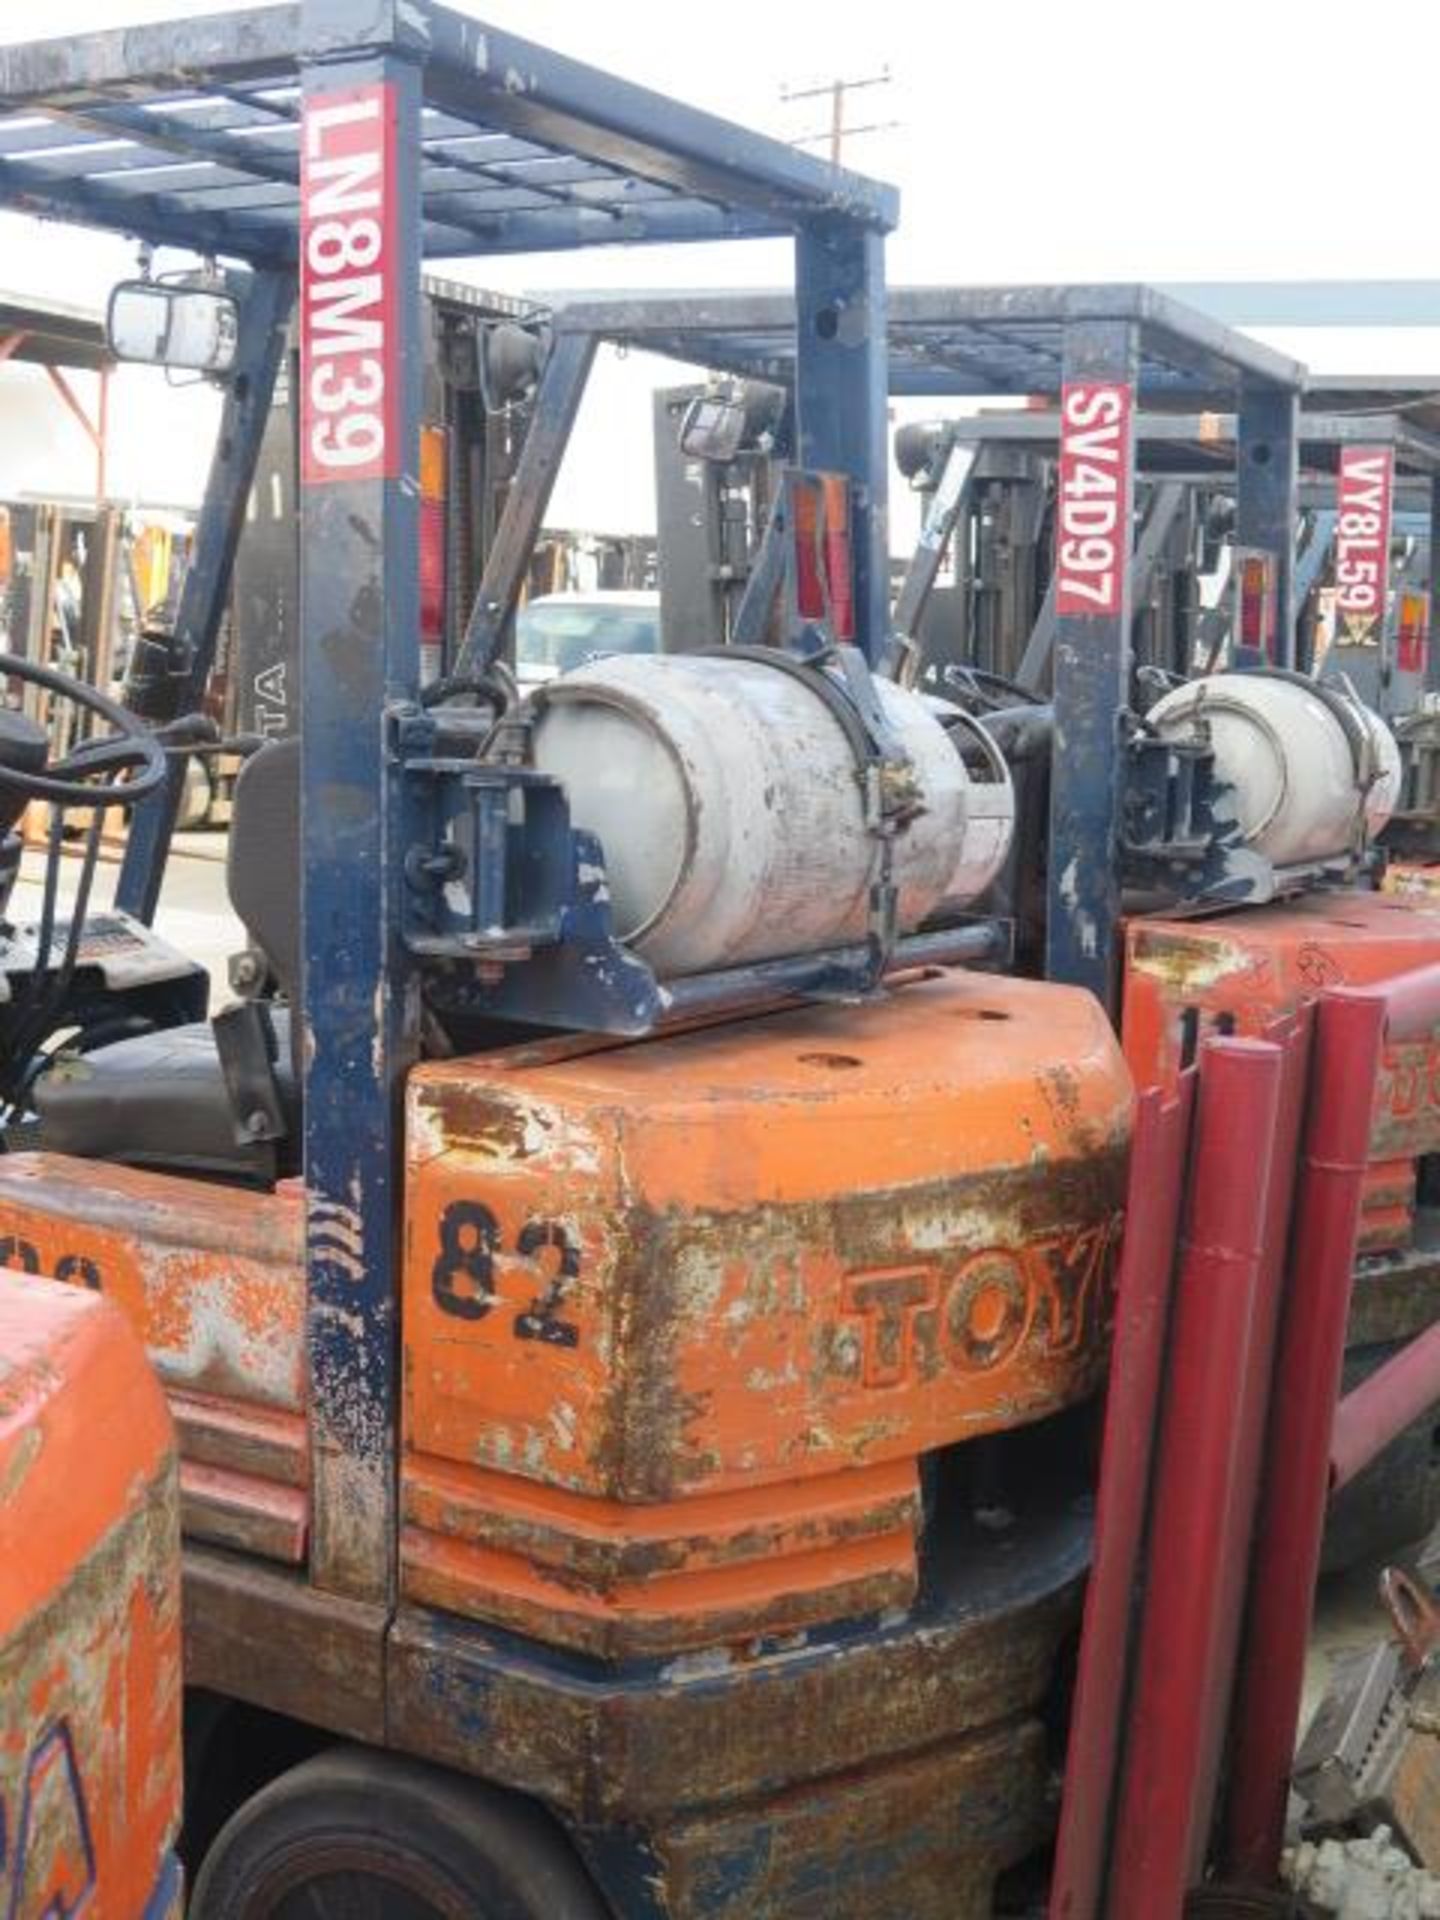 Toyota 5FGC25 5000 Lb Cap LPG Forklift s/n 84733 w/ 3-Stage Mast, 197" Lift Height, Cushion Tires, - Image 3 of 11